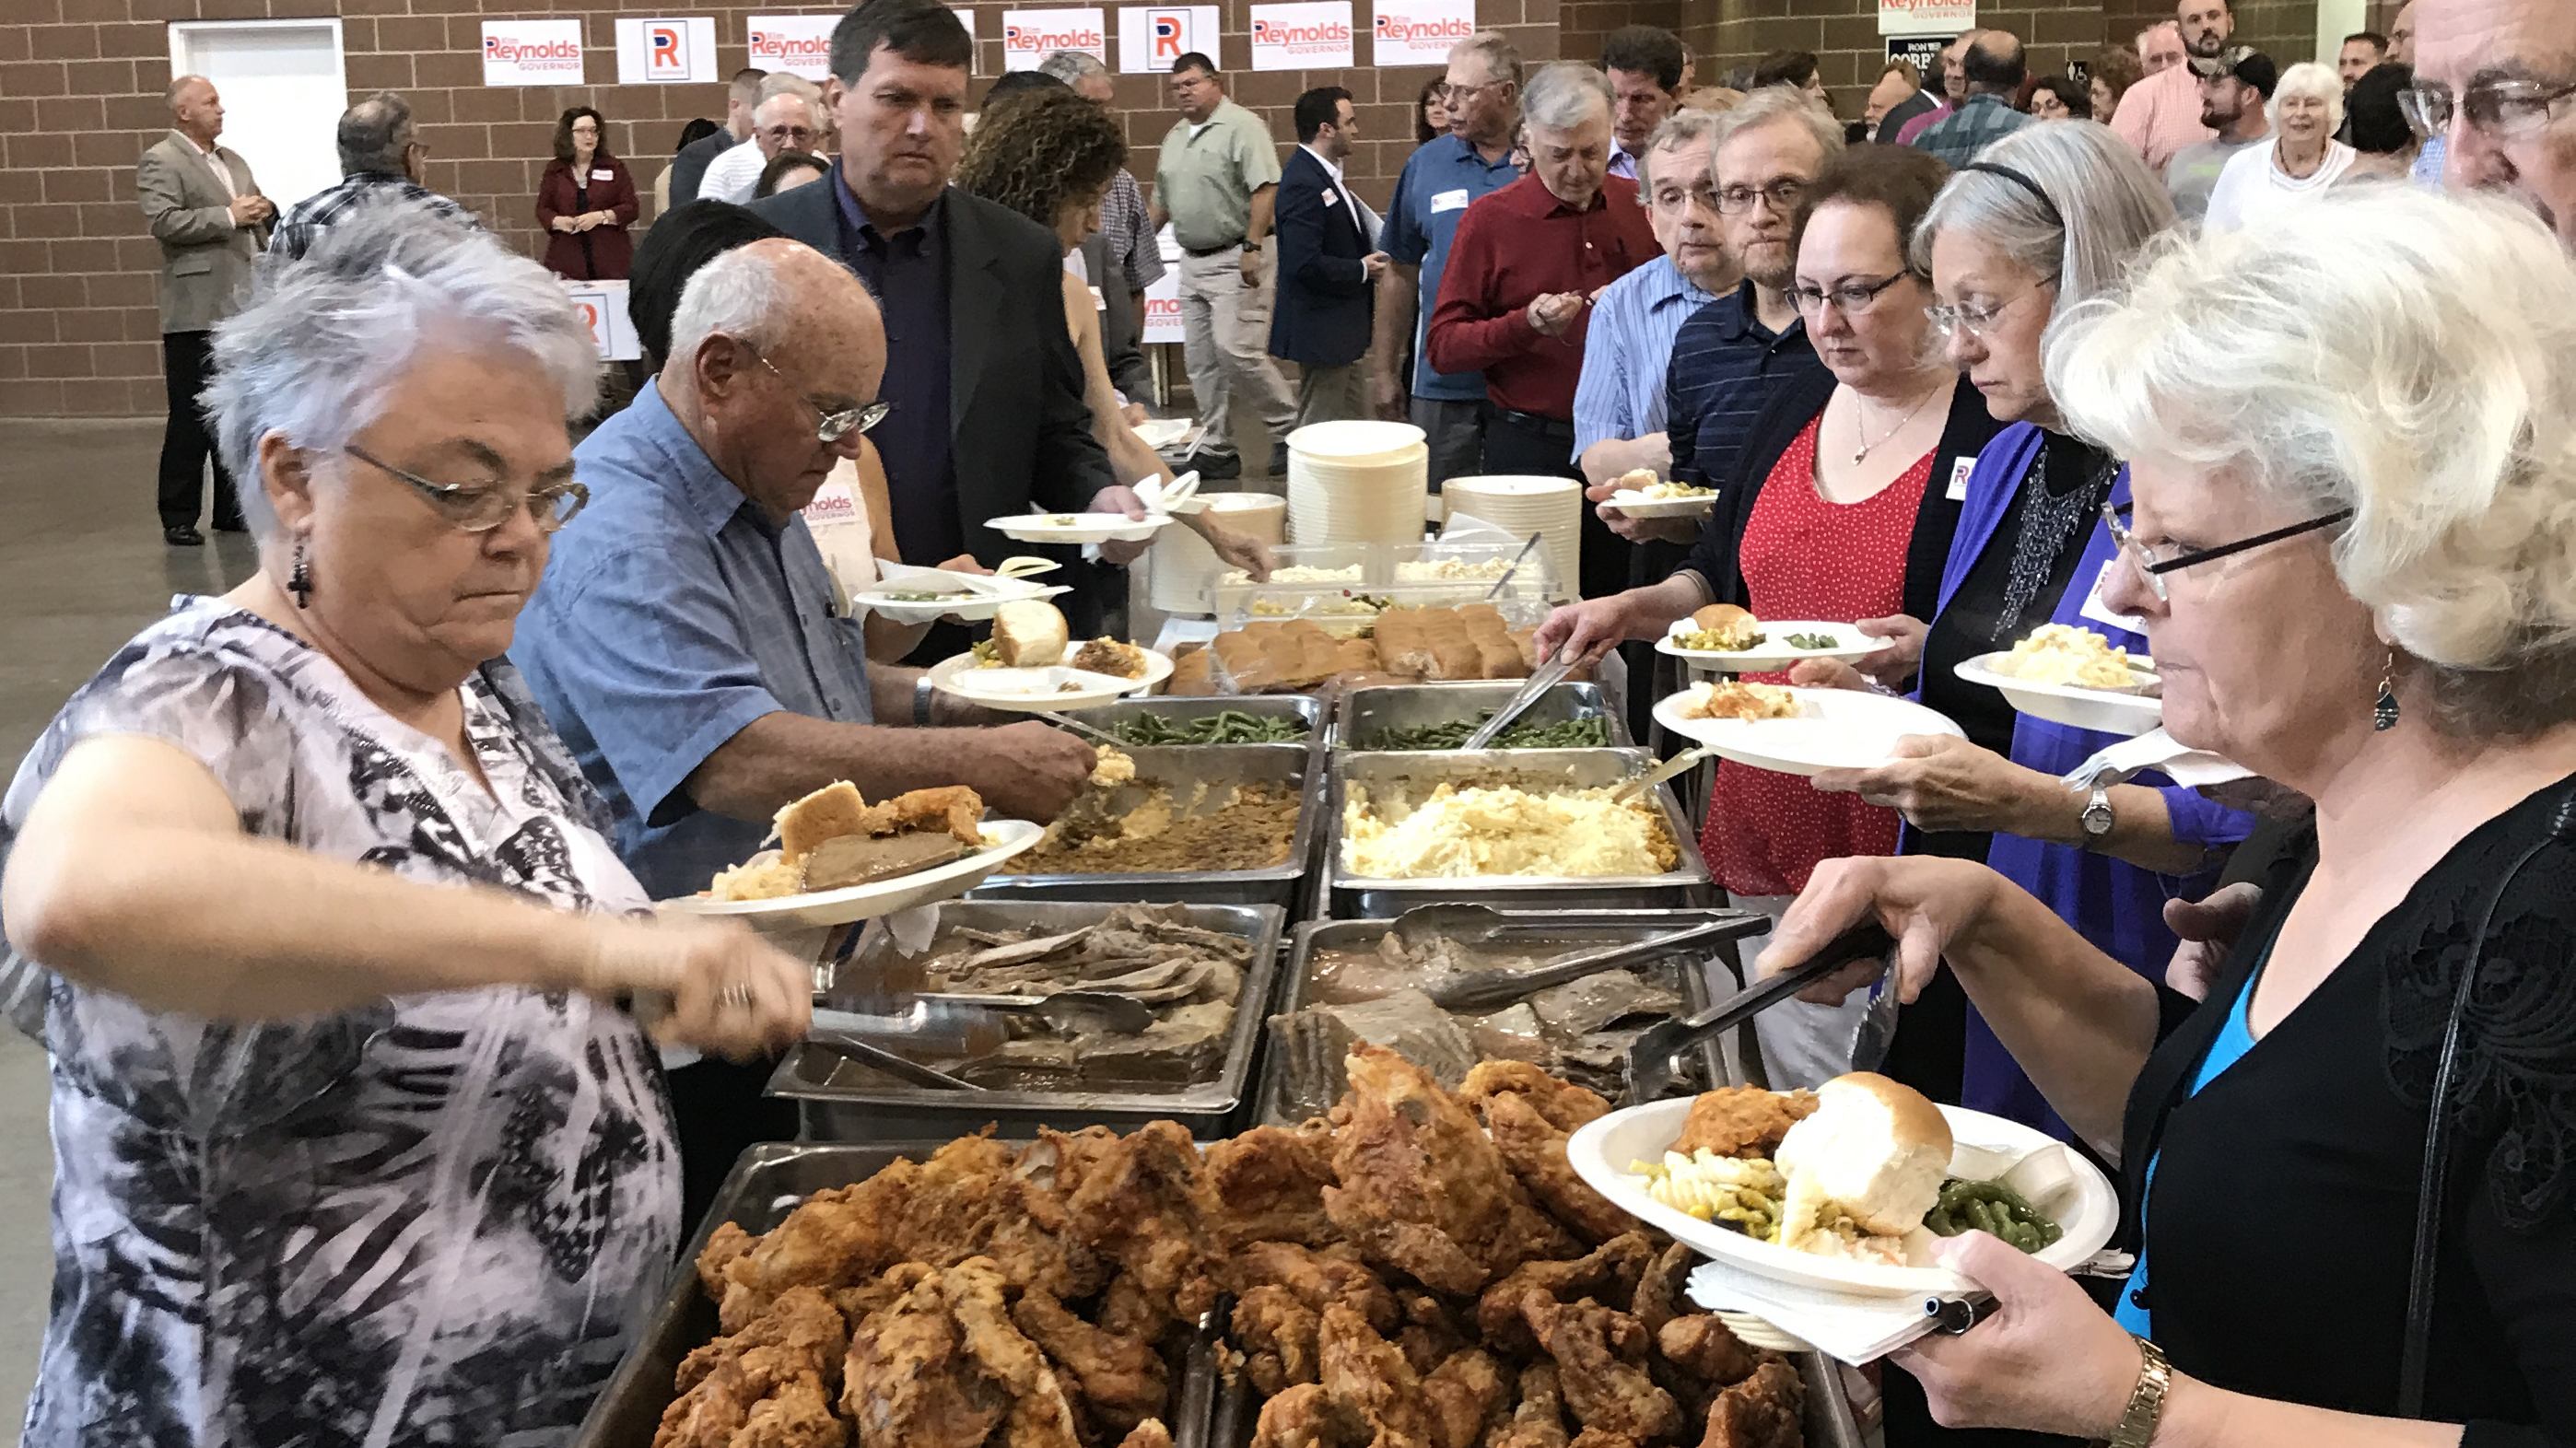 Social conservatives enjoying a fried chicken dinner in Des Moines on Saturday night. (Photo by Clay Masters/Iowa Public Radio)